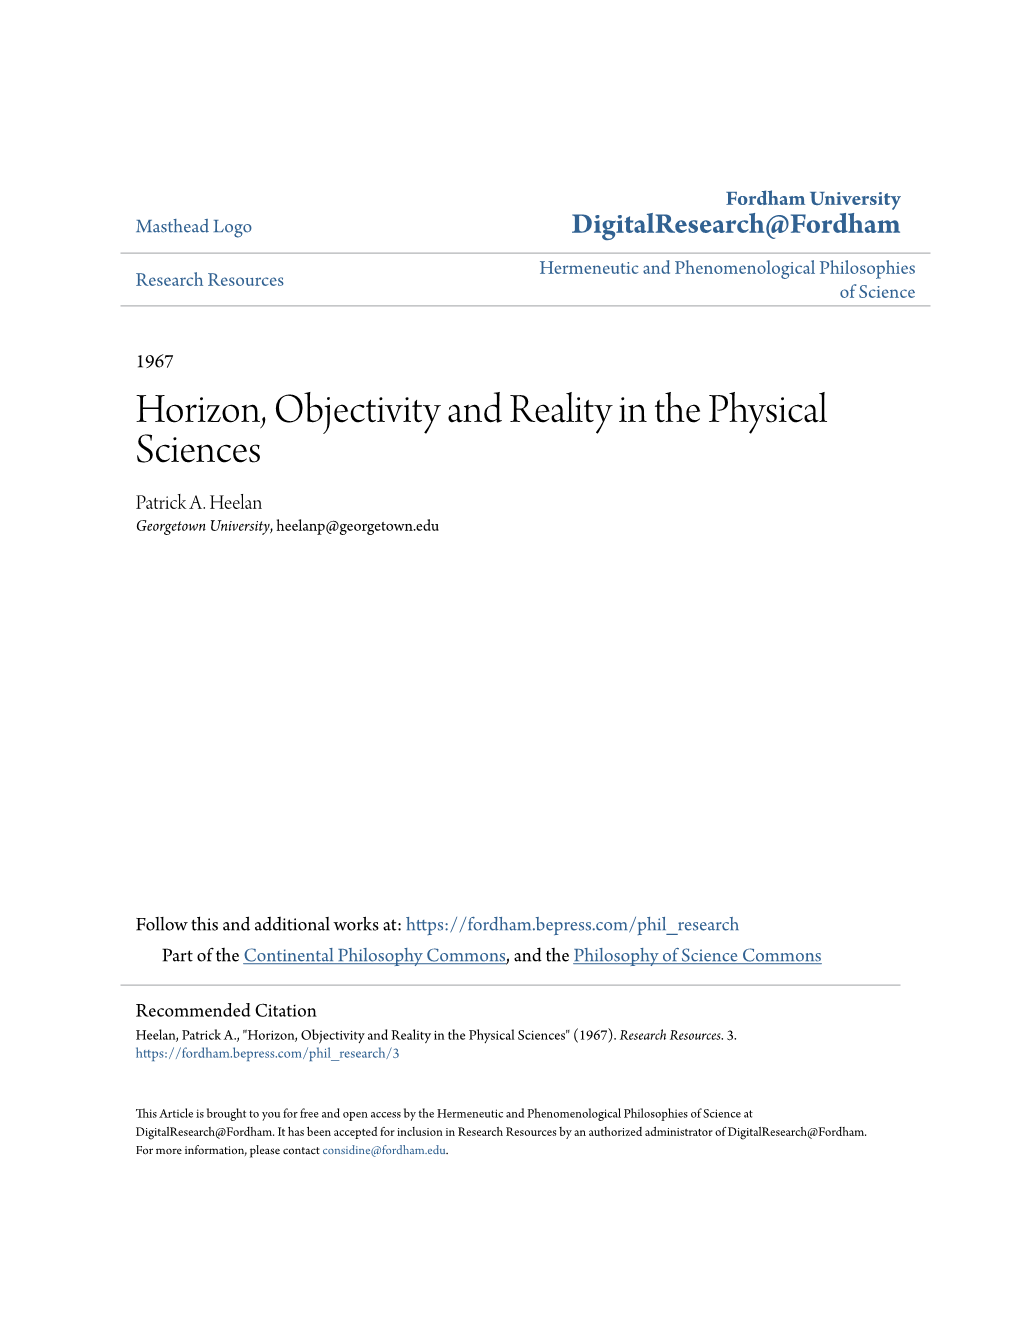 Horizon, Objectivity and Reality in the Physical Sciences Patrick A